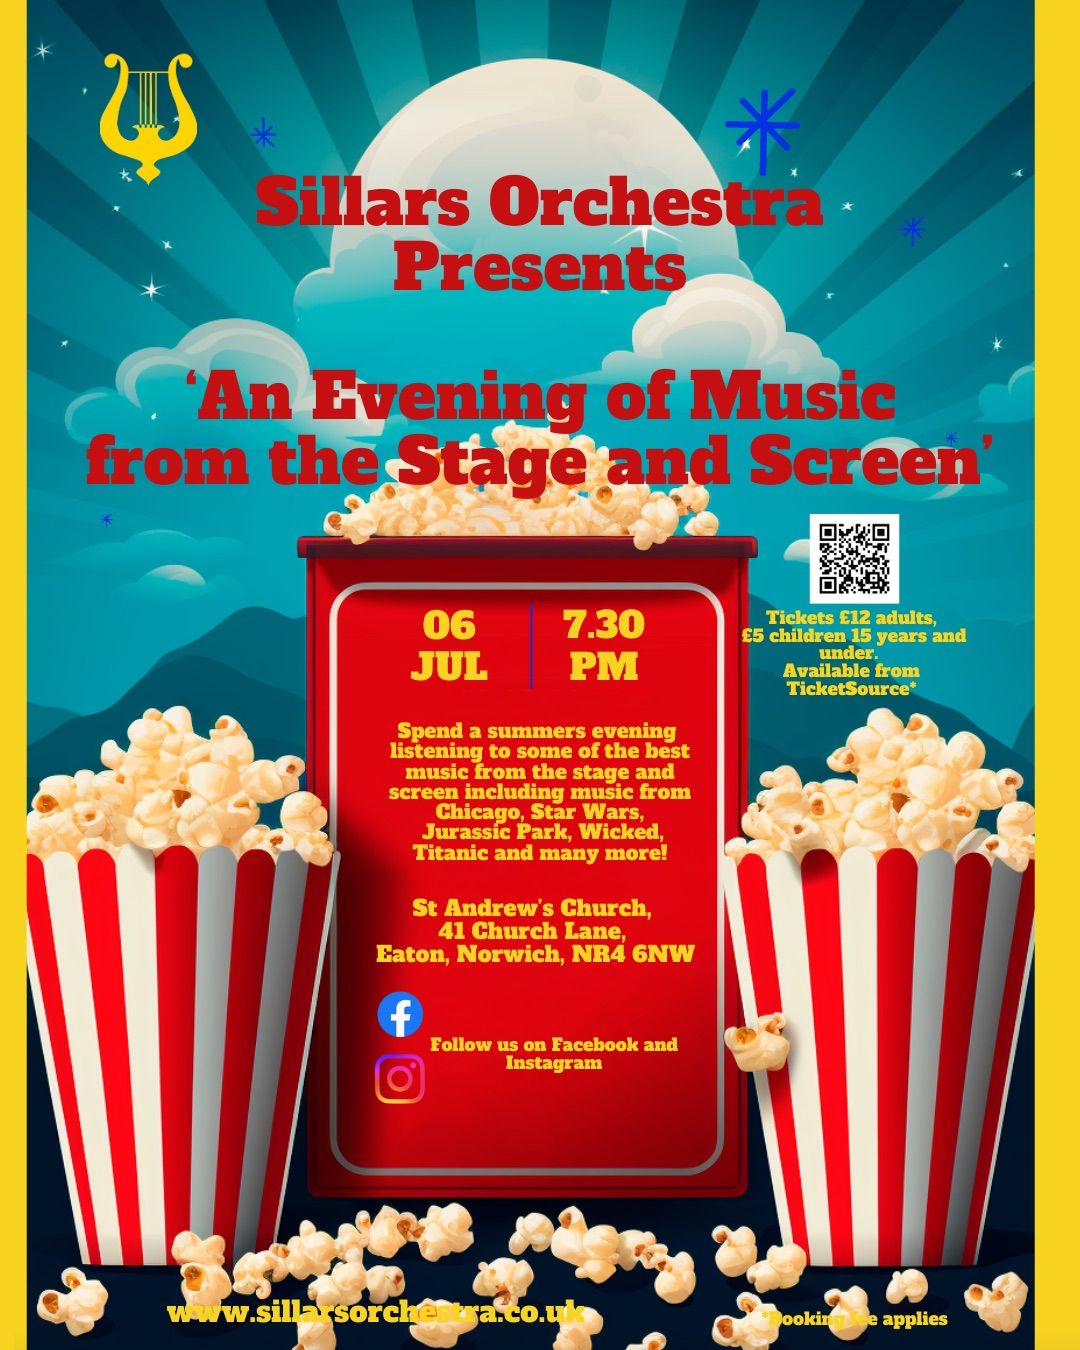 An evening of music from the Stage and Screen